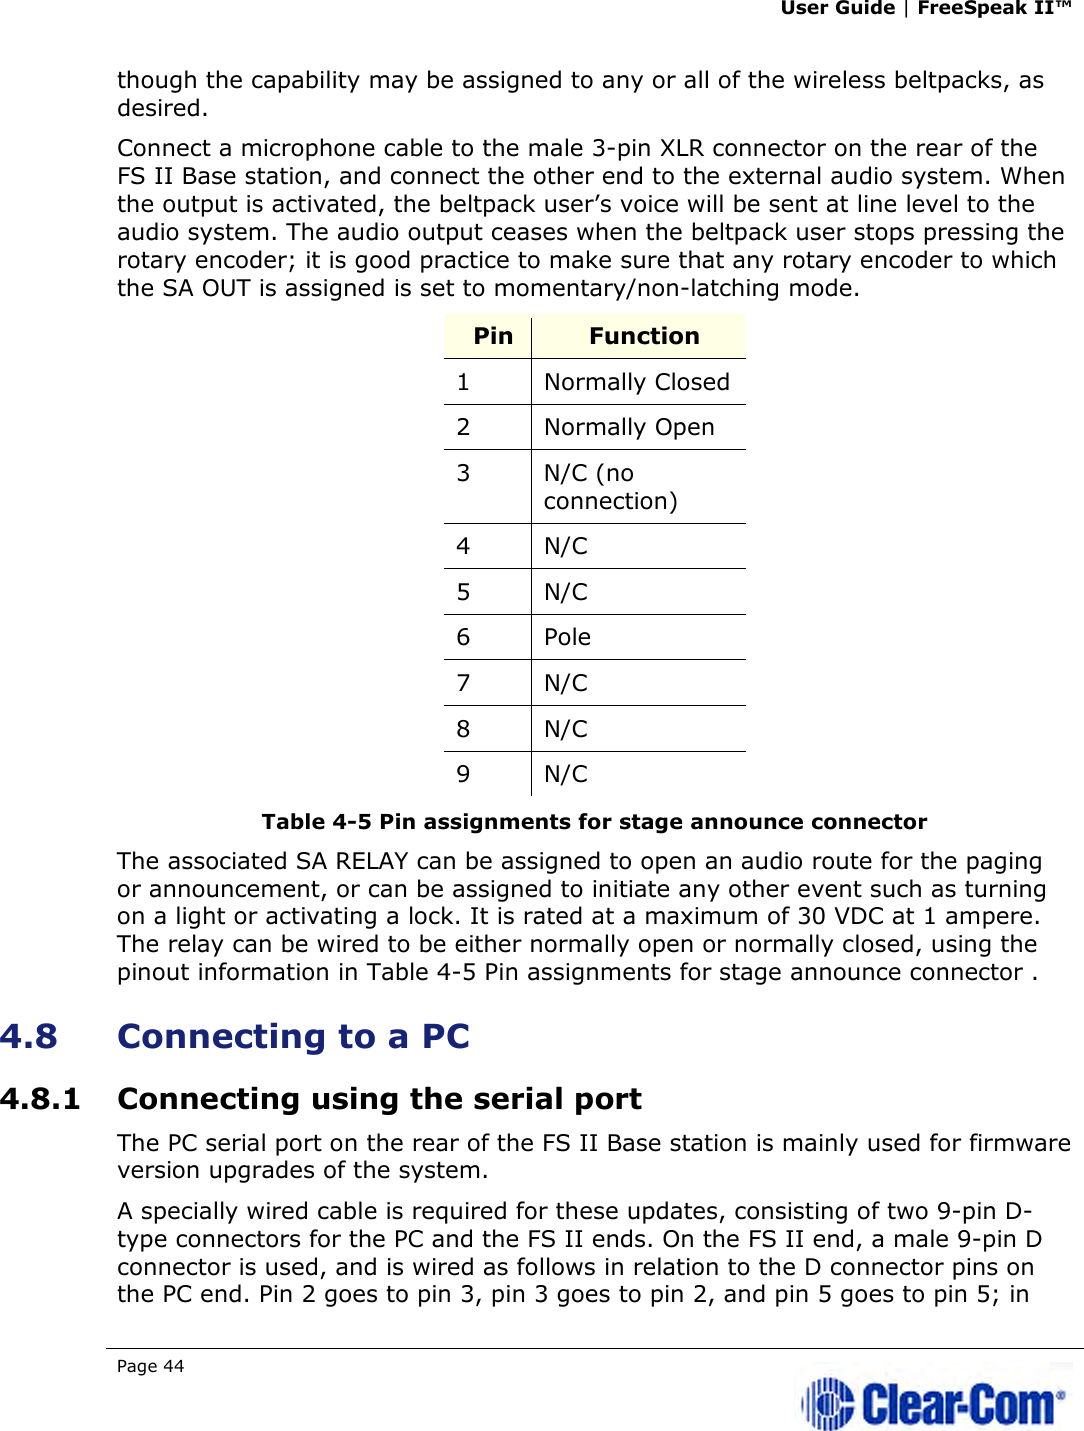 User Guide | FreeSpeak II™  Page 44   though the capability may be assigned to any or all of the wireless beltpacks, as desired. Connect a microphone cable to the male 3-pin XLR connector on the rear of the FS II Base station, and connect the other end to the external audio system. When the output is activated, the beltpack user’s voice will be sent at line level to the audio system. The audio output ceases when the beltpack user stops pressing the rotary encoder; it is good practice to make sure that any rotary encoder to which the SA OUT is assigned is set to momentary/non-latching mode. Pin  Function 1  Normally Closed 2  Normally Open 3  N/C (no connection) 4  N/C 5  N/C  6  Pole 7  N/C 8  N/C 9  N/C Table 4-5 Pin assignments for stage announce connector  The associated SA RELAY can be assigned to open an audio route for the paging or announcement, or can be assigned to initiate any other event such as turning on a light or activating a lock. It is rated at a maximum of 30 VDC at 1 ampere. The relay can be wired to be either normally open or normally closed, using the pinout information in Table 4-5 Pin assignments for stage announce connector . 4.8 Connecting to a PC  4.8.1 Connecting using the serial port The PC serial port on the rear of the FS II Base station is mainly used for firmware version upgrades of the system.  A specially wired cable is required for these updates, consisting of two 9-pin D-type connectors for the PC and the FS II ends. On the FS II end, a male 9-pin D connector is used, and is wired as follows in relation to the D connector pins on the PC end. Pin 2 goes to pin 3, pin 3 goes to pin 2, and pin 5 goes to pin 5; in 